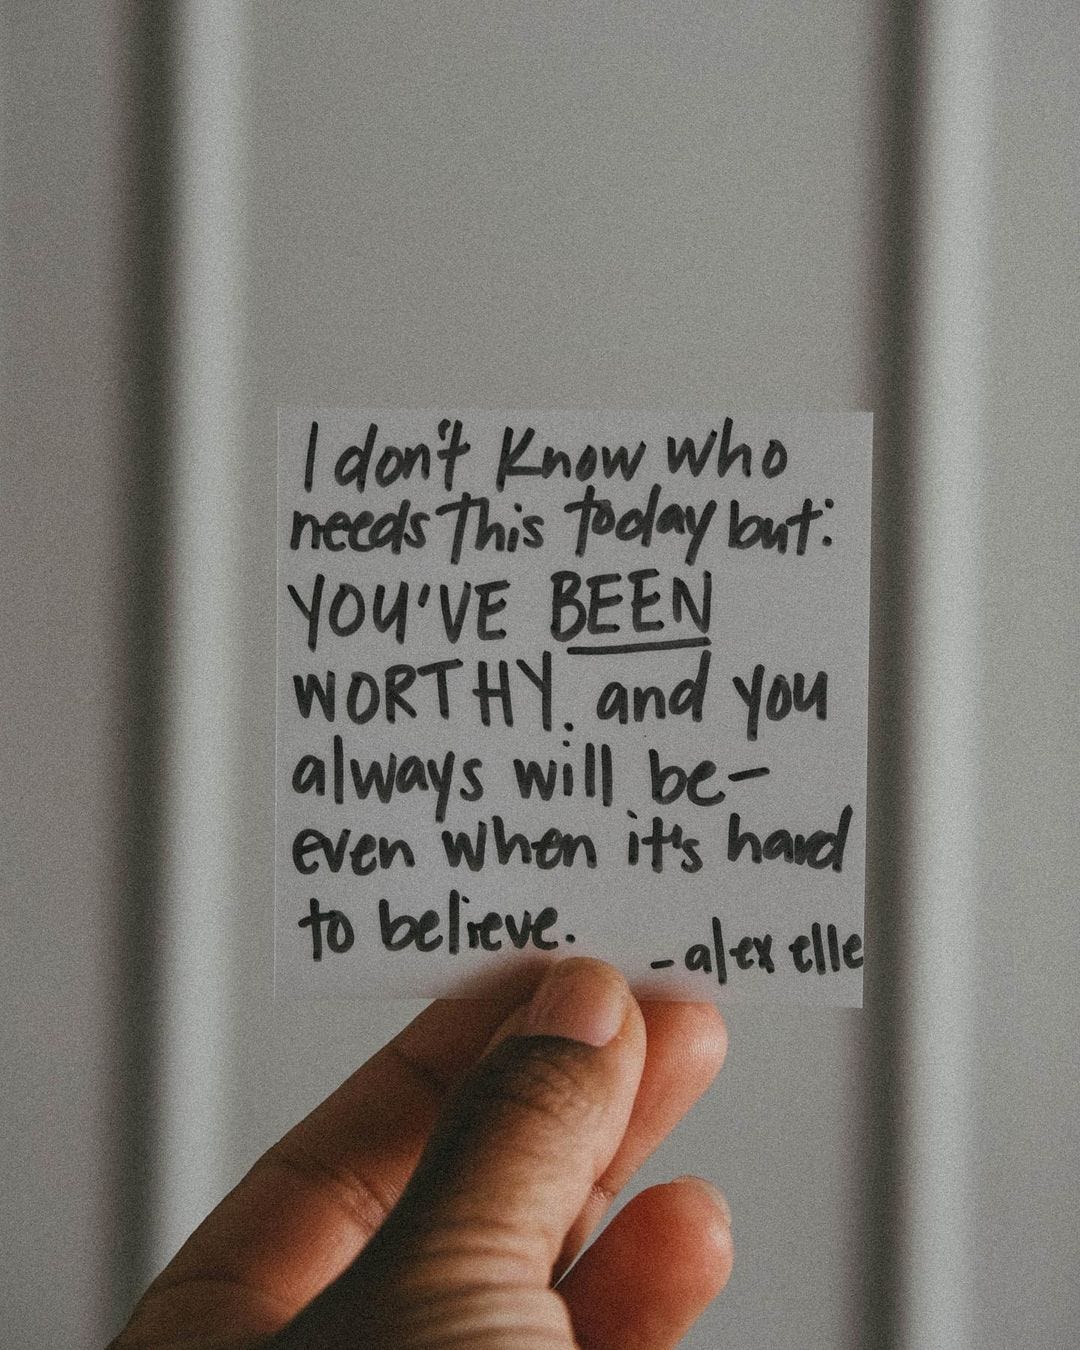 A handwritten post-it note that reads: "I don't know who needs this today but: YOU'VE BEEN WORTHY. and you always will be – even when it's hard to believe." - alex elle